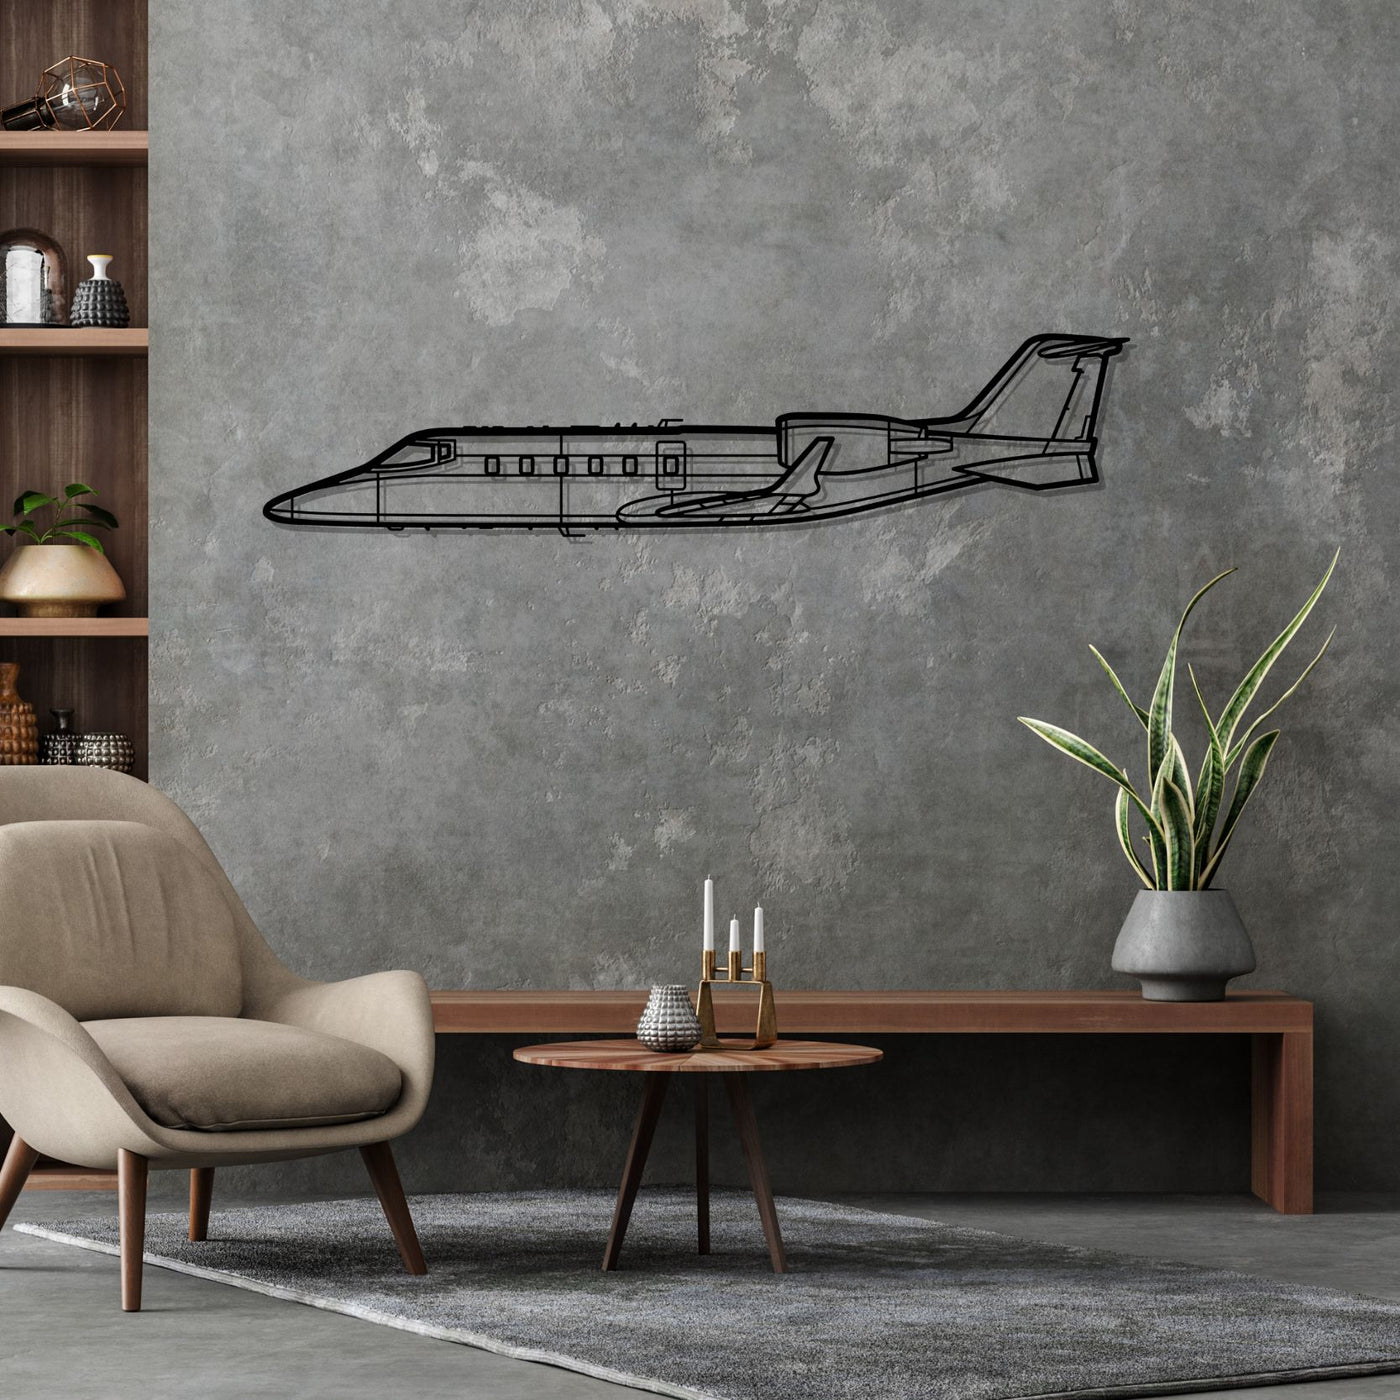 Learjet 60 Silhouette Metal Wall Art – aircraftvibes